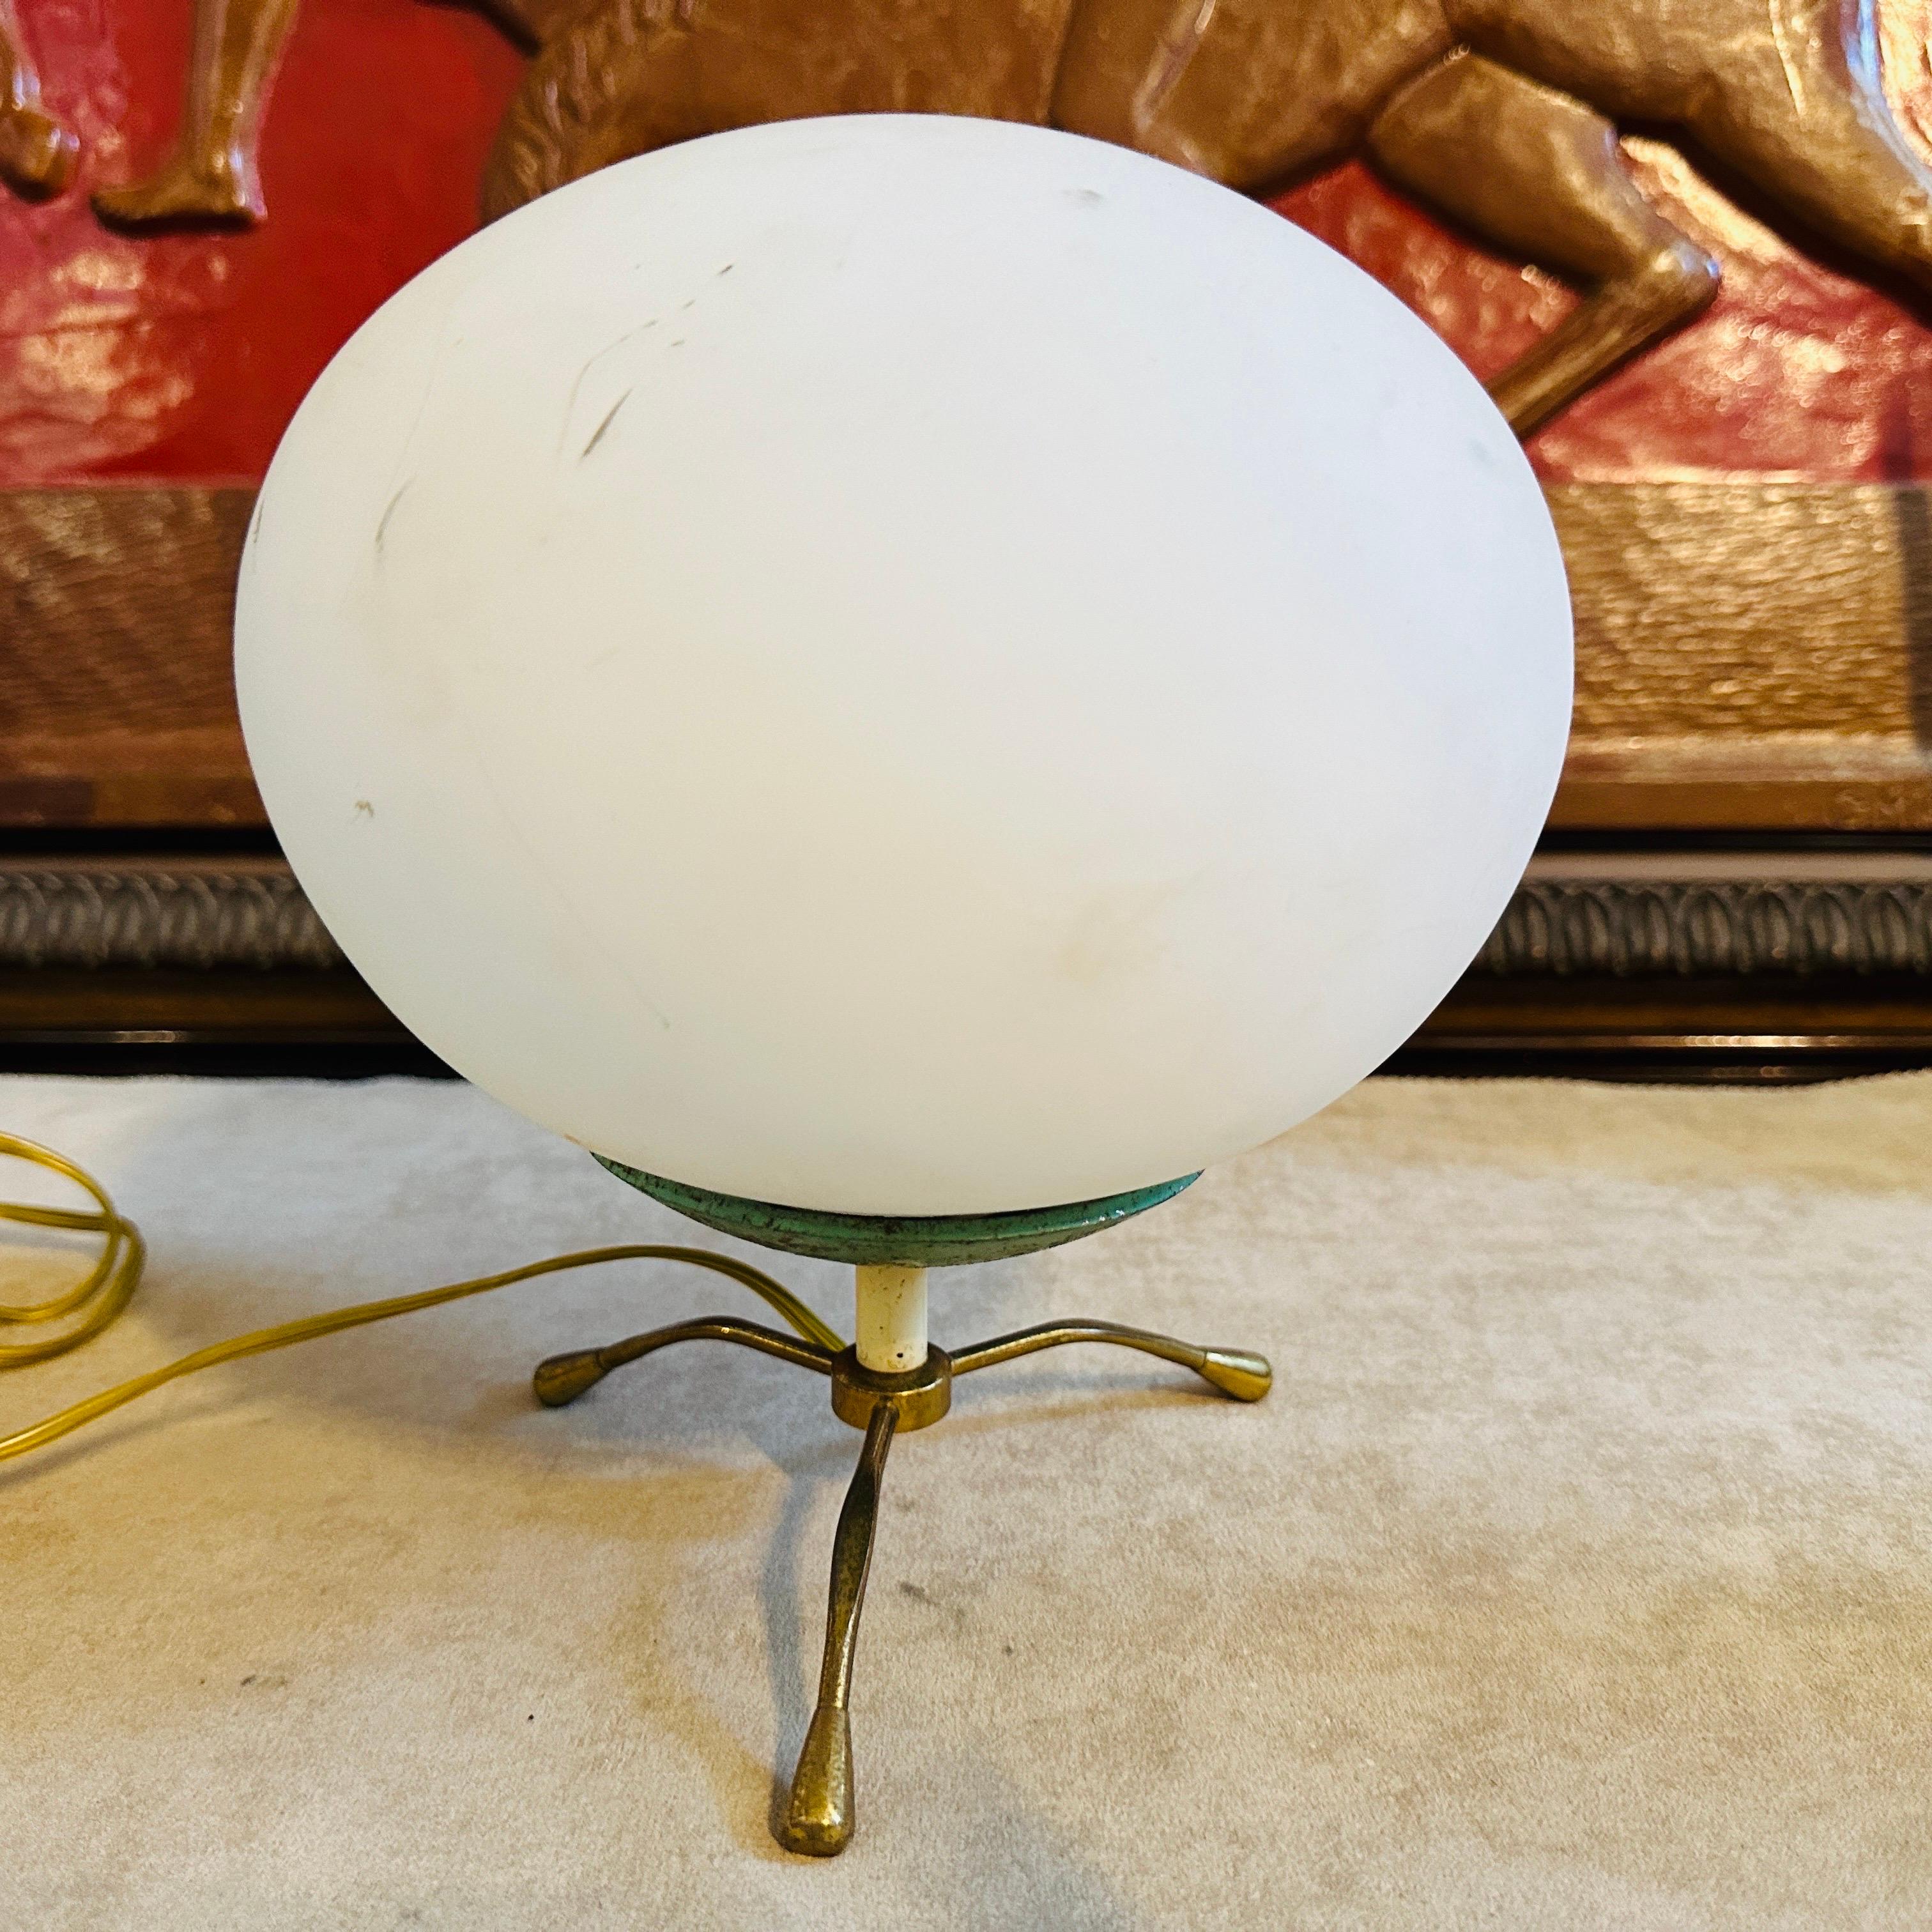 This brass, green painted metal and white opaline glass desk lamp designed and manufactured in Italy in the Fifties epitomizes the era's design ethos, blending form and function with sleek lines and innovative materials. The lamps has been designed